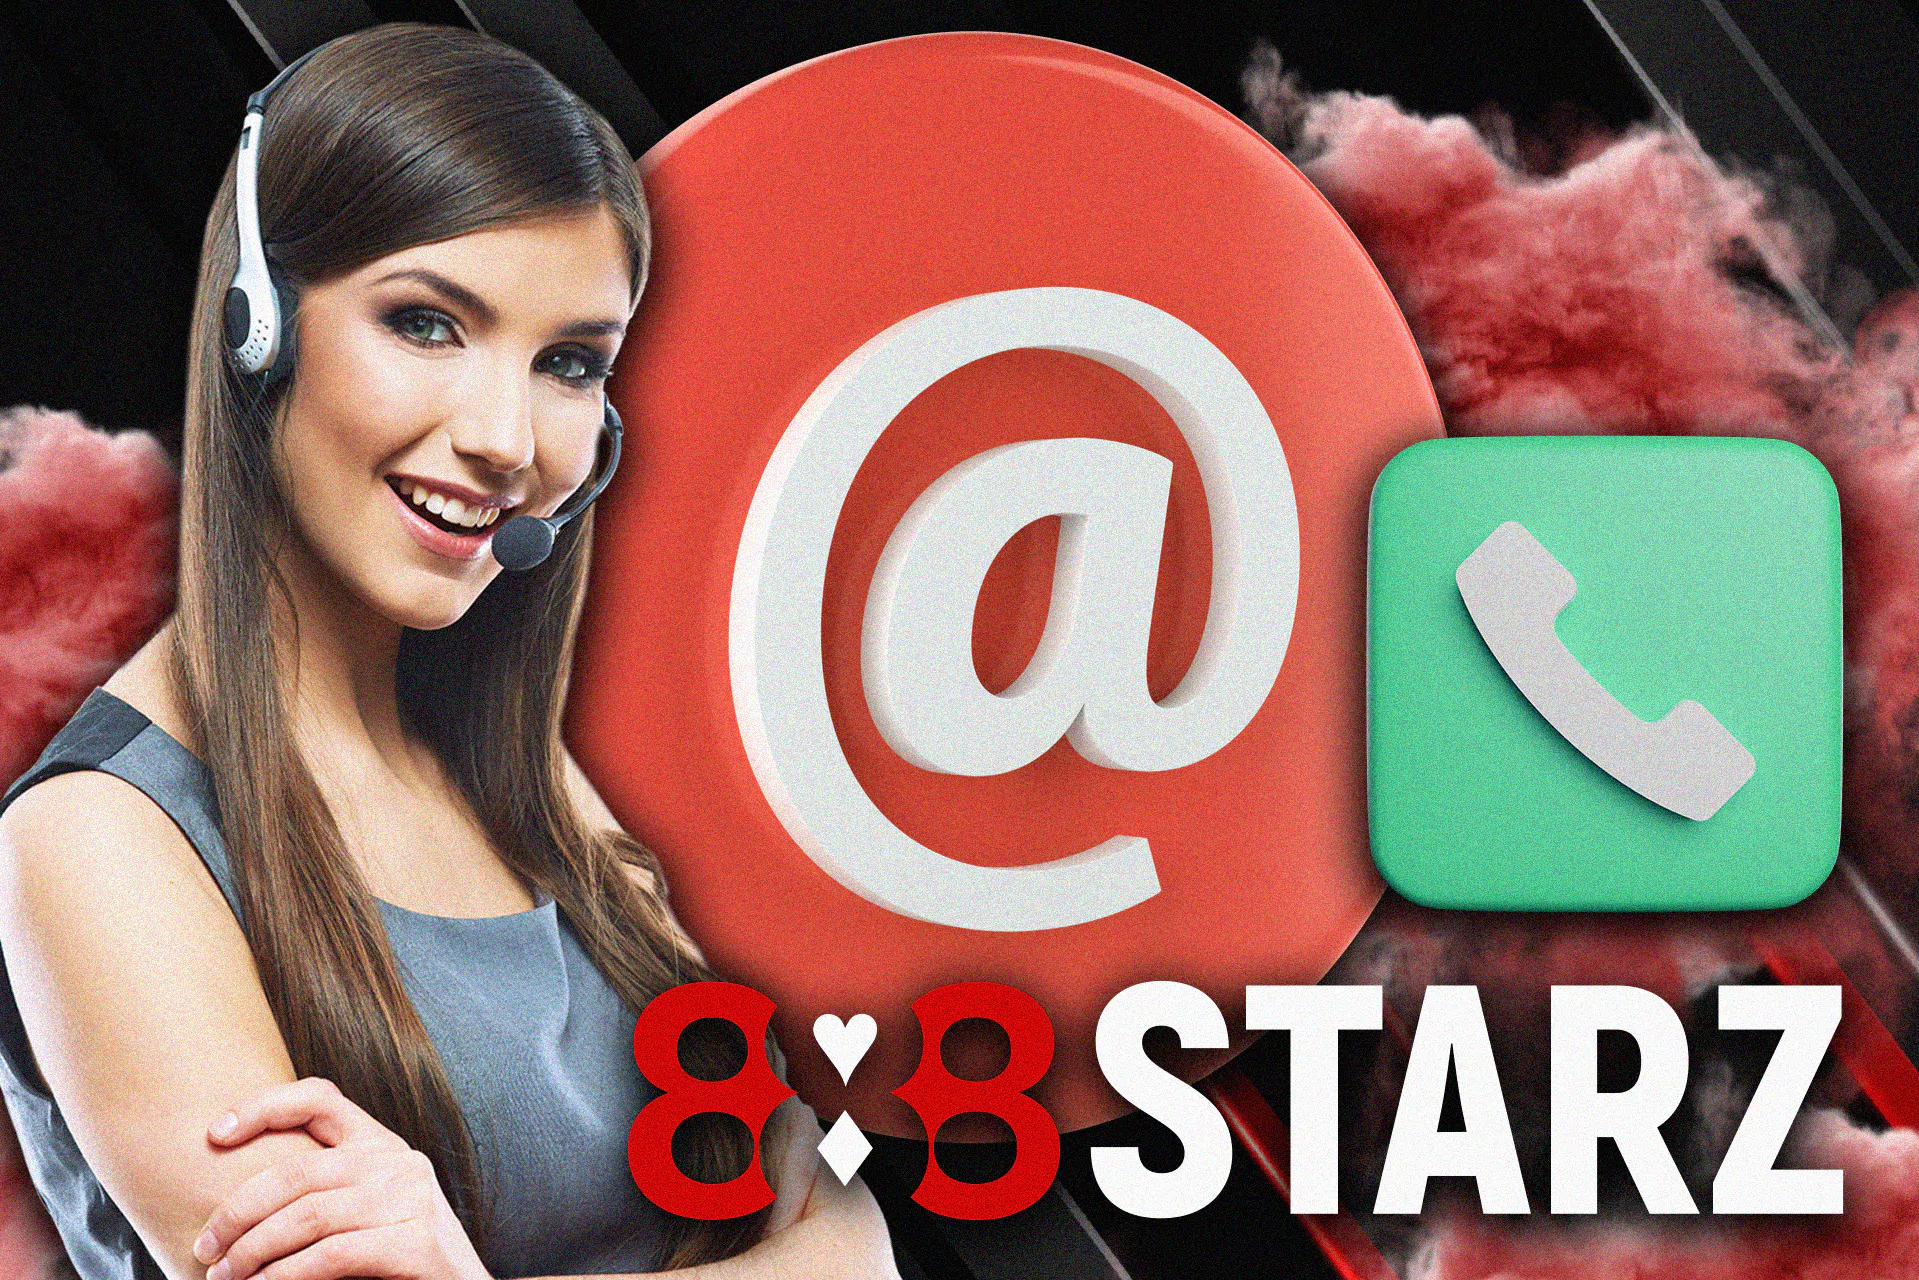 Use any of these conatcts to reach the 888starz team.